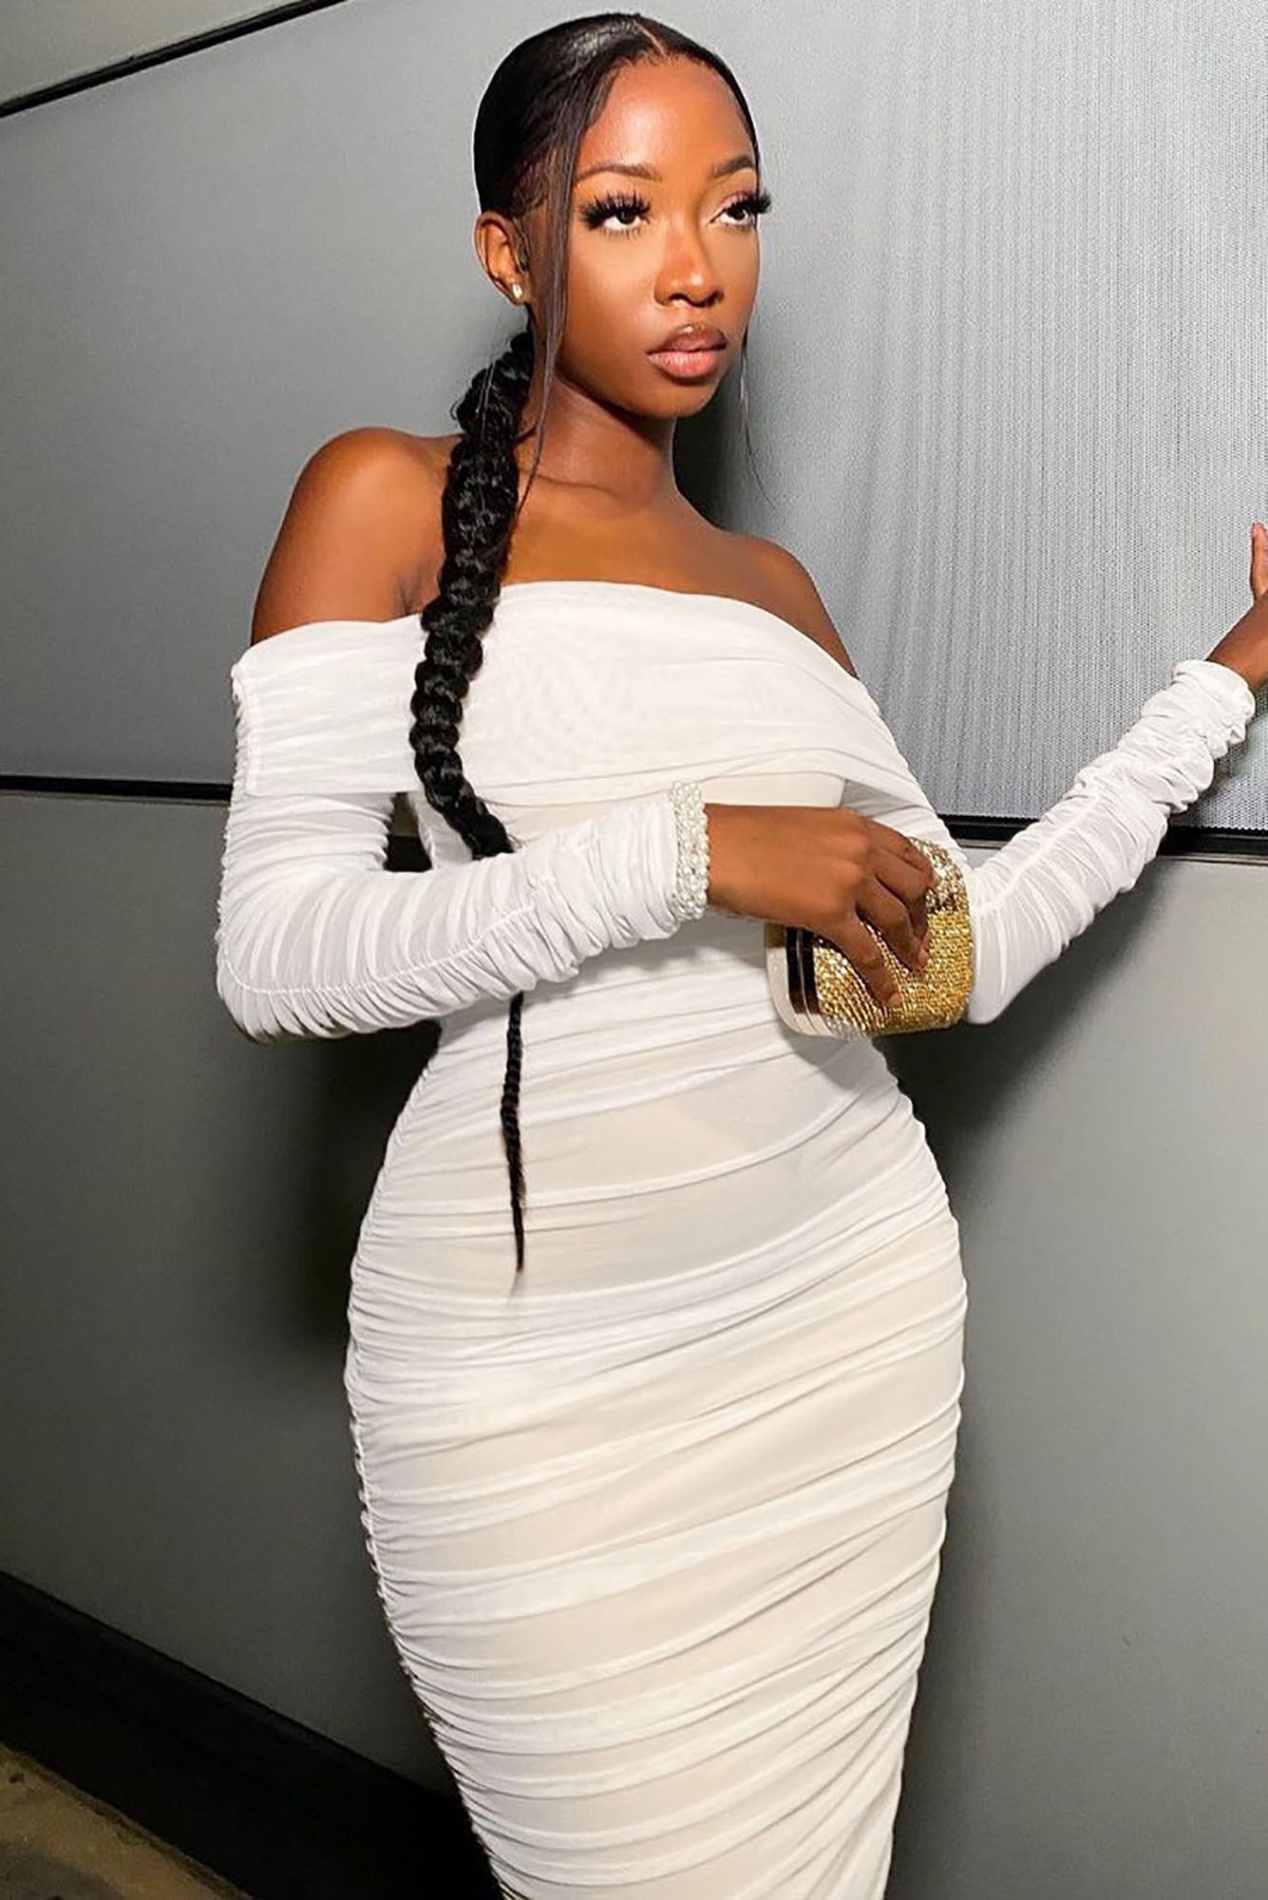 Get The Perfect Summer Look With A Fashion Nova White Dress!